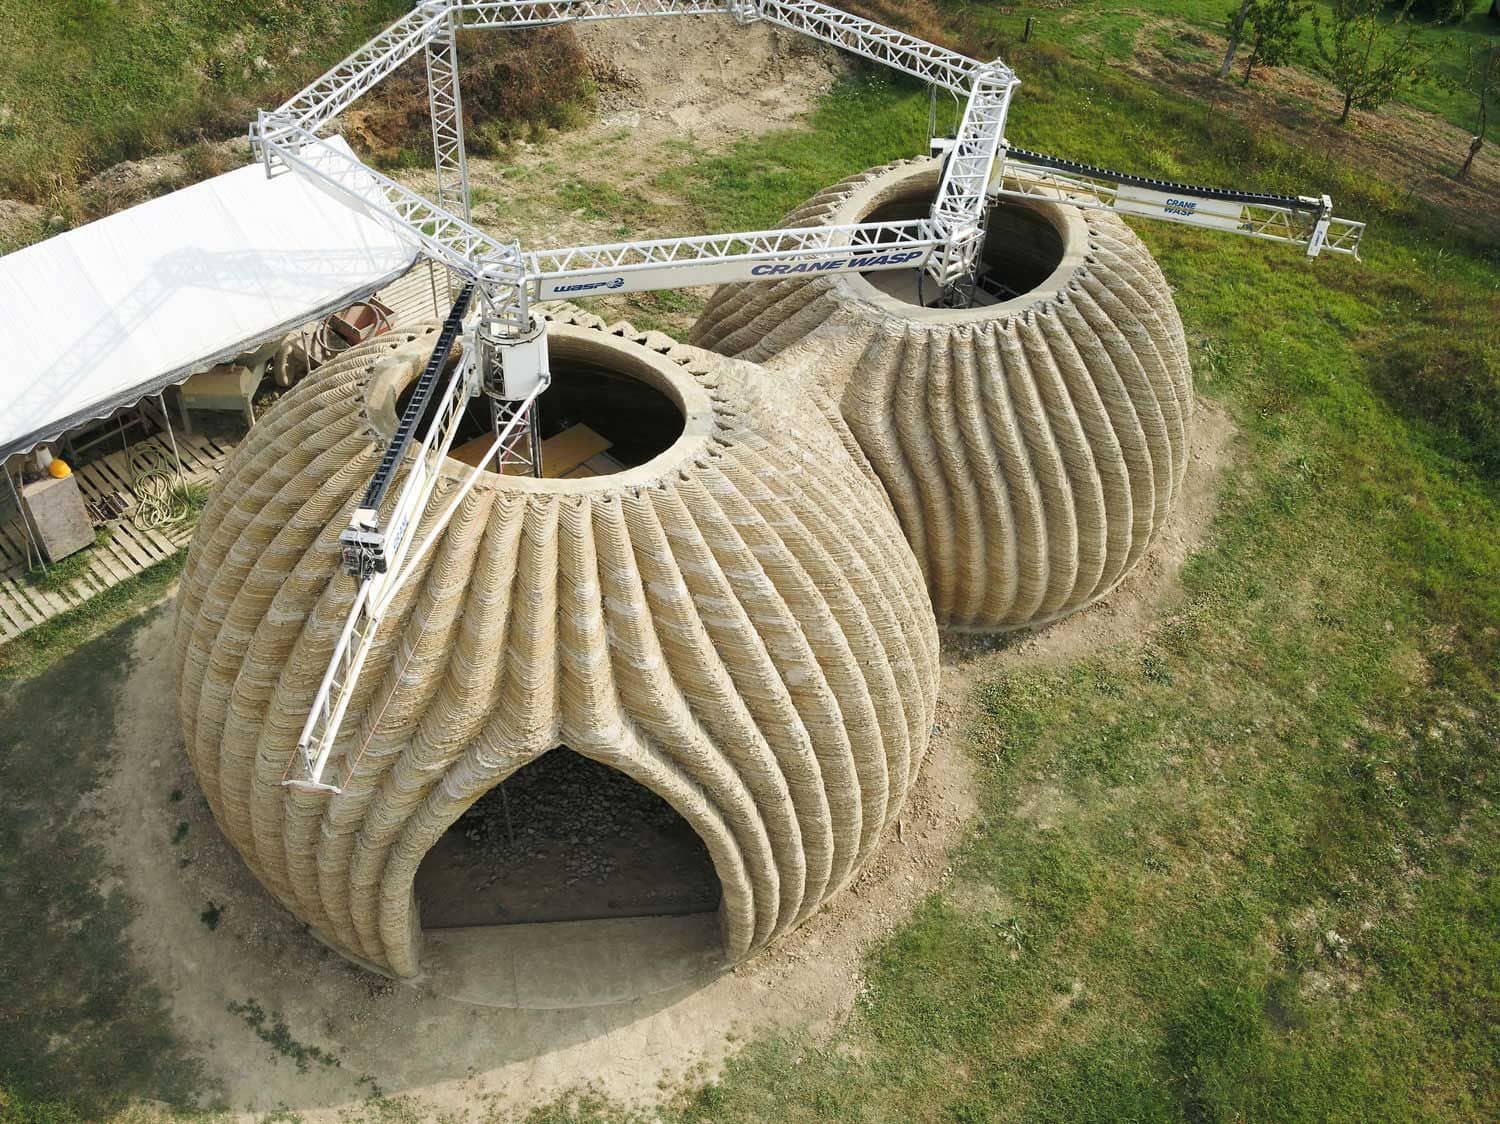 WASP Crane 3D Printers construct the TECLA dome house.